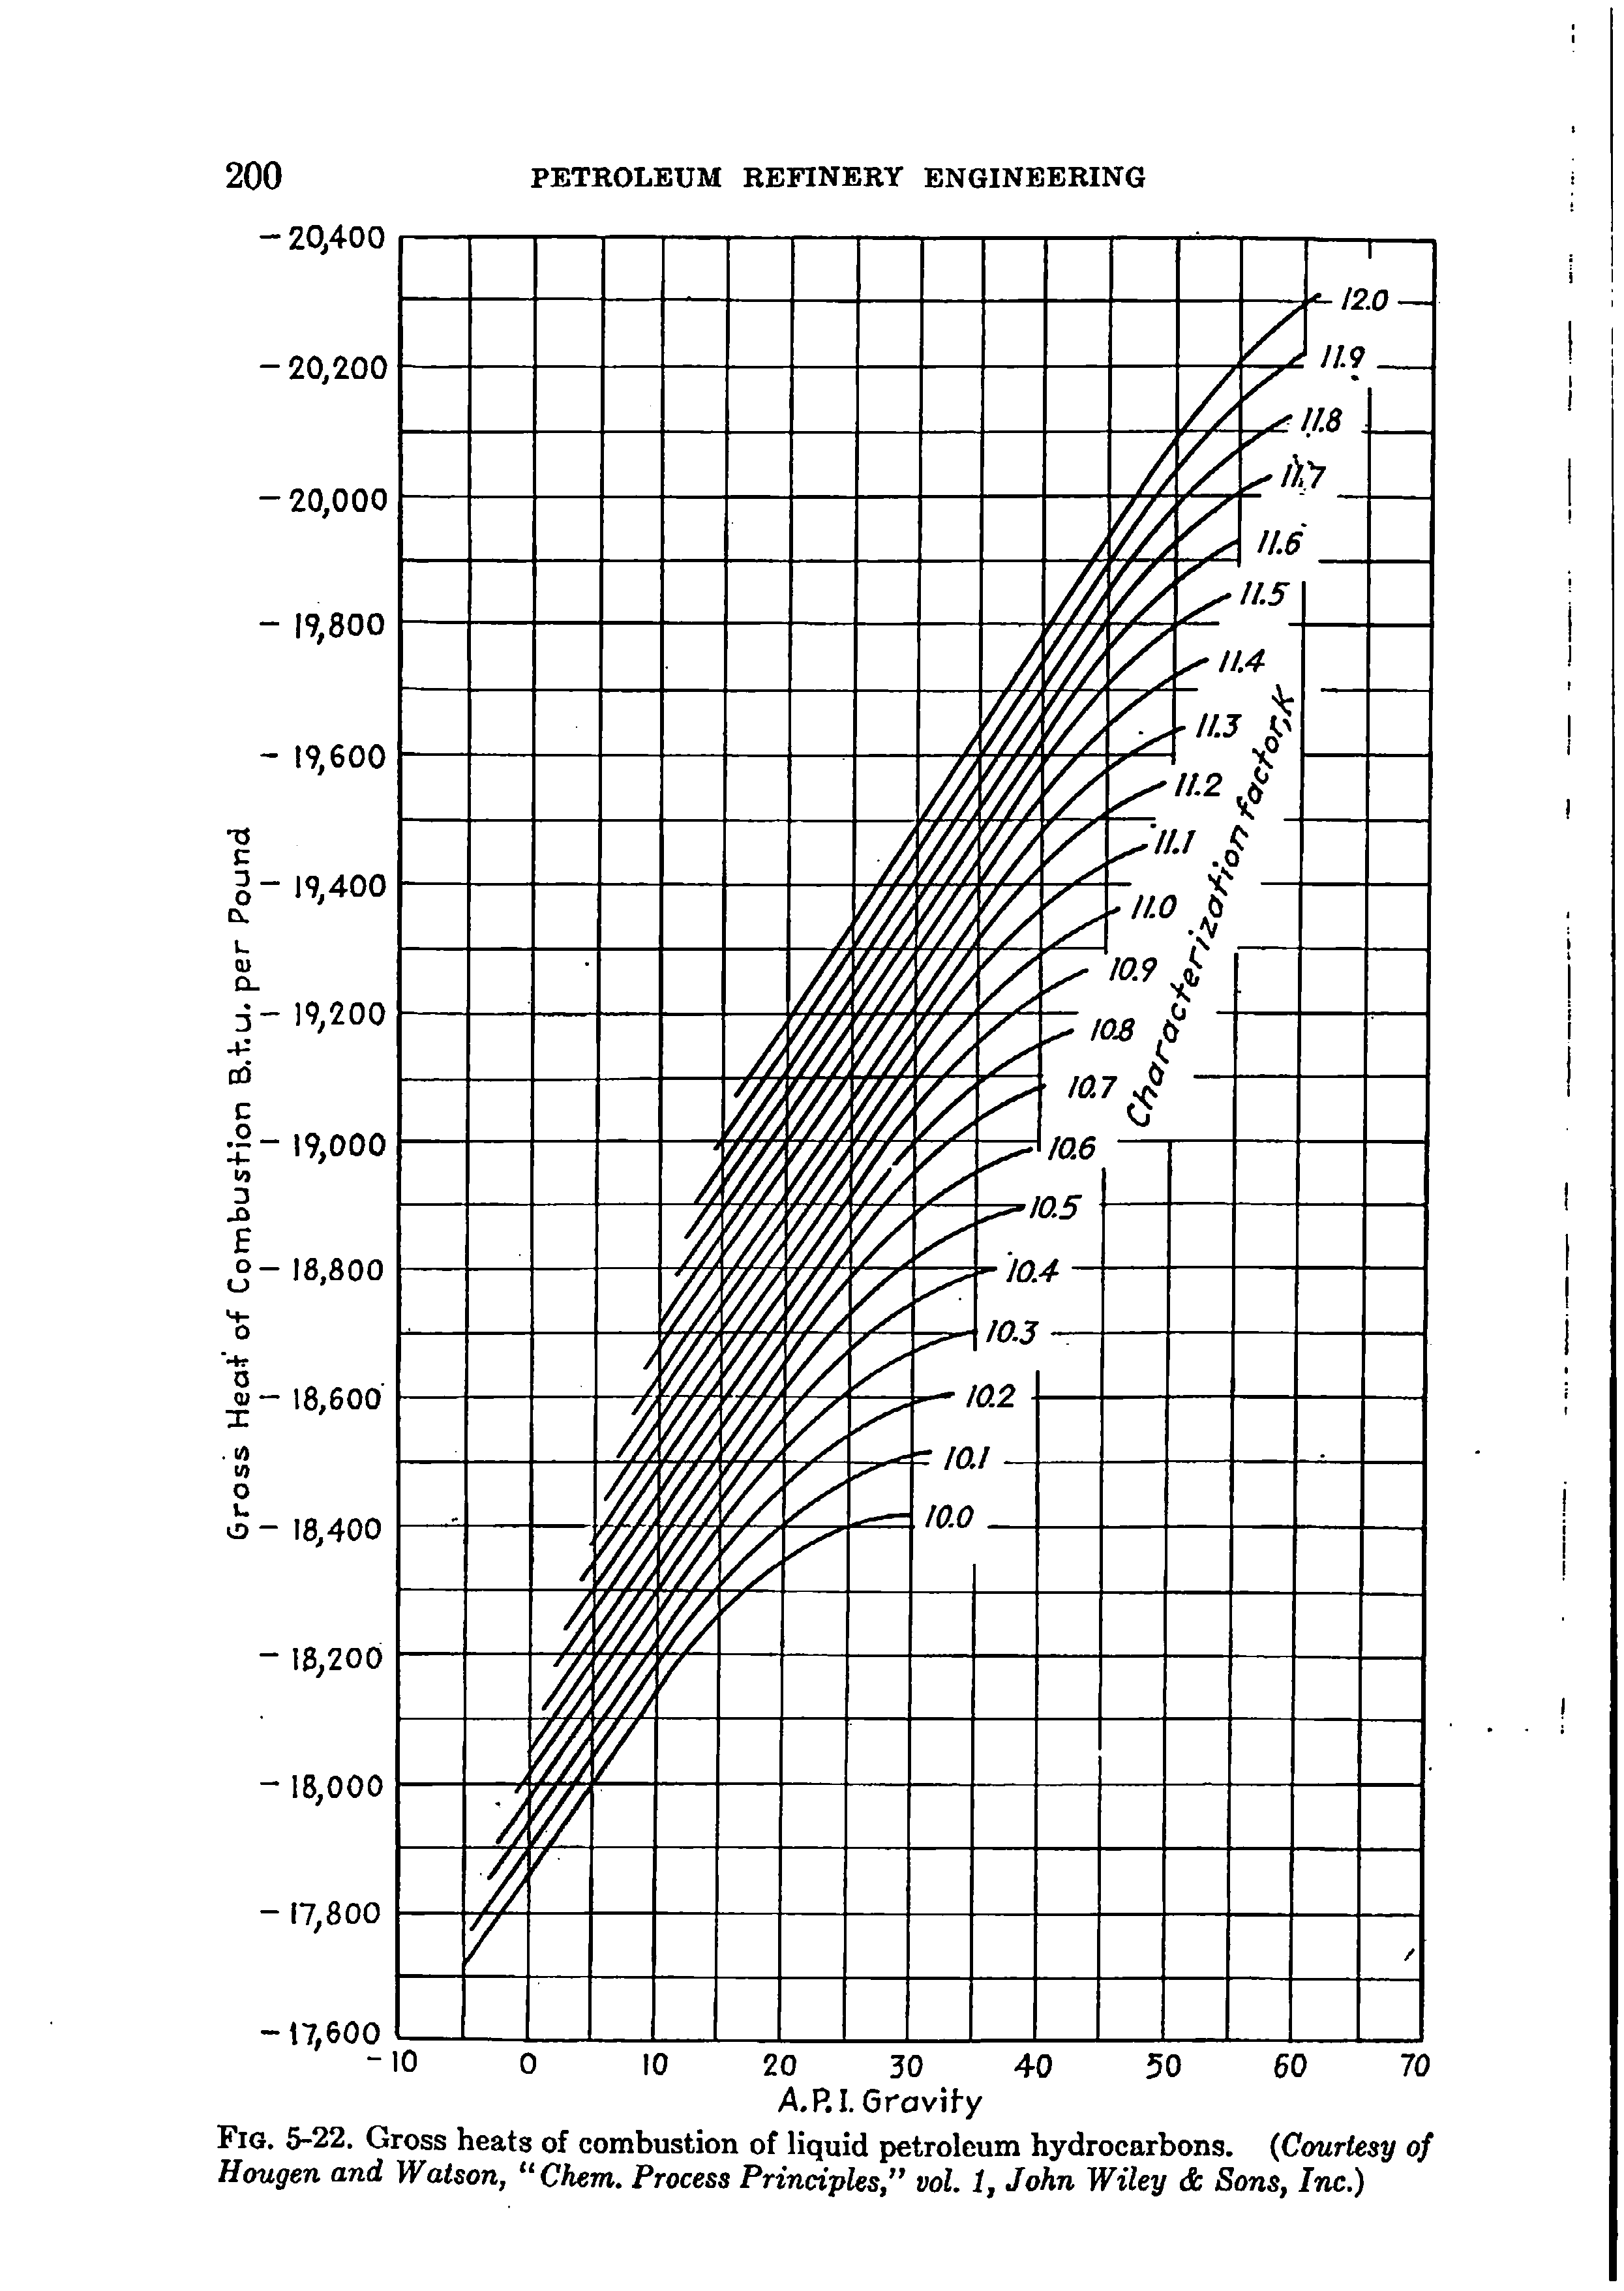 Fig. 5-22. Gross heats of combustion of liquid petroleum hydrocarbons. Courtesy of Hougen and Watson, Chem. Process Principles, vol. 1, John Wiley Sons, Inc.)...